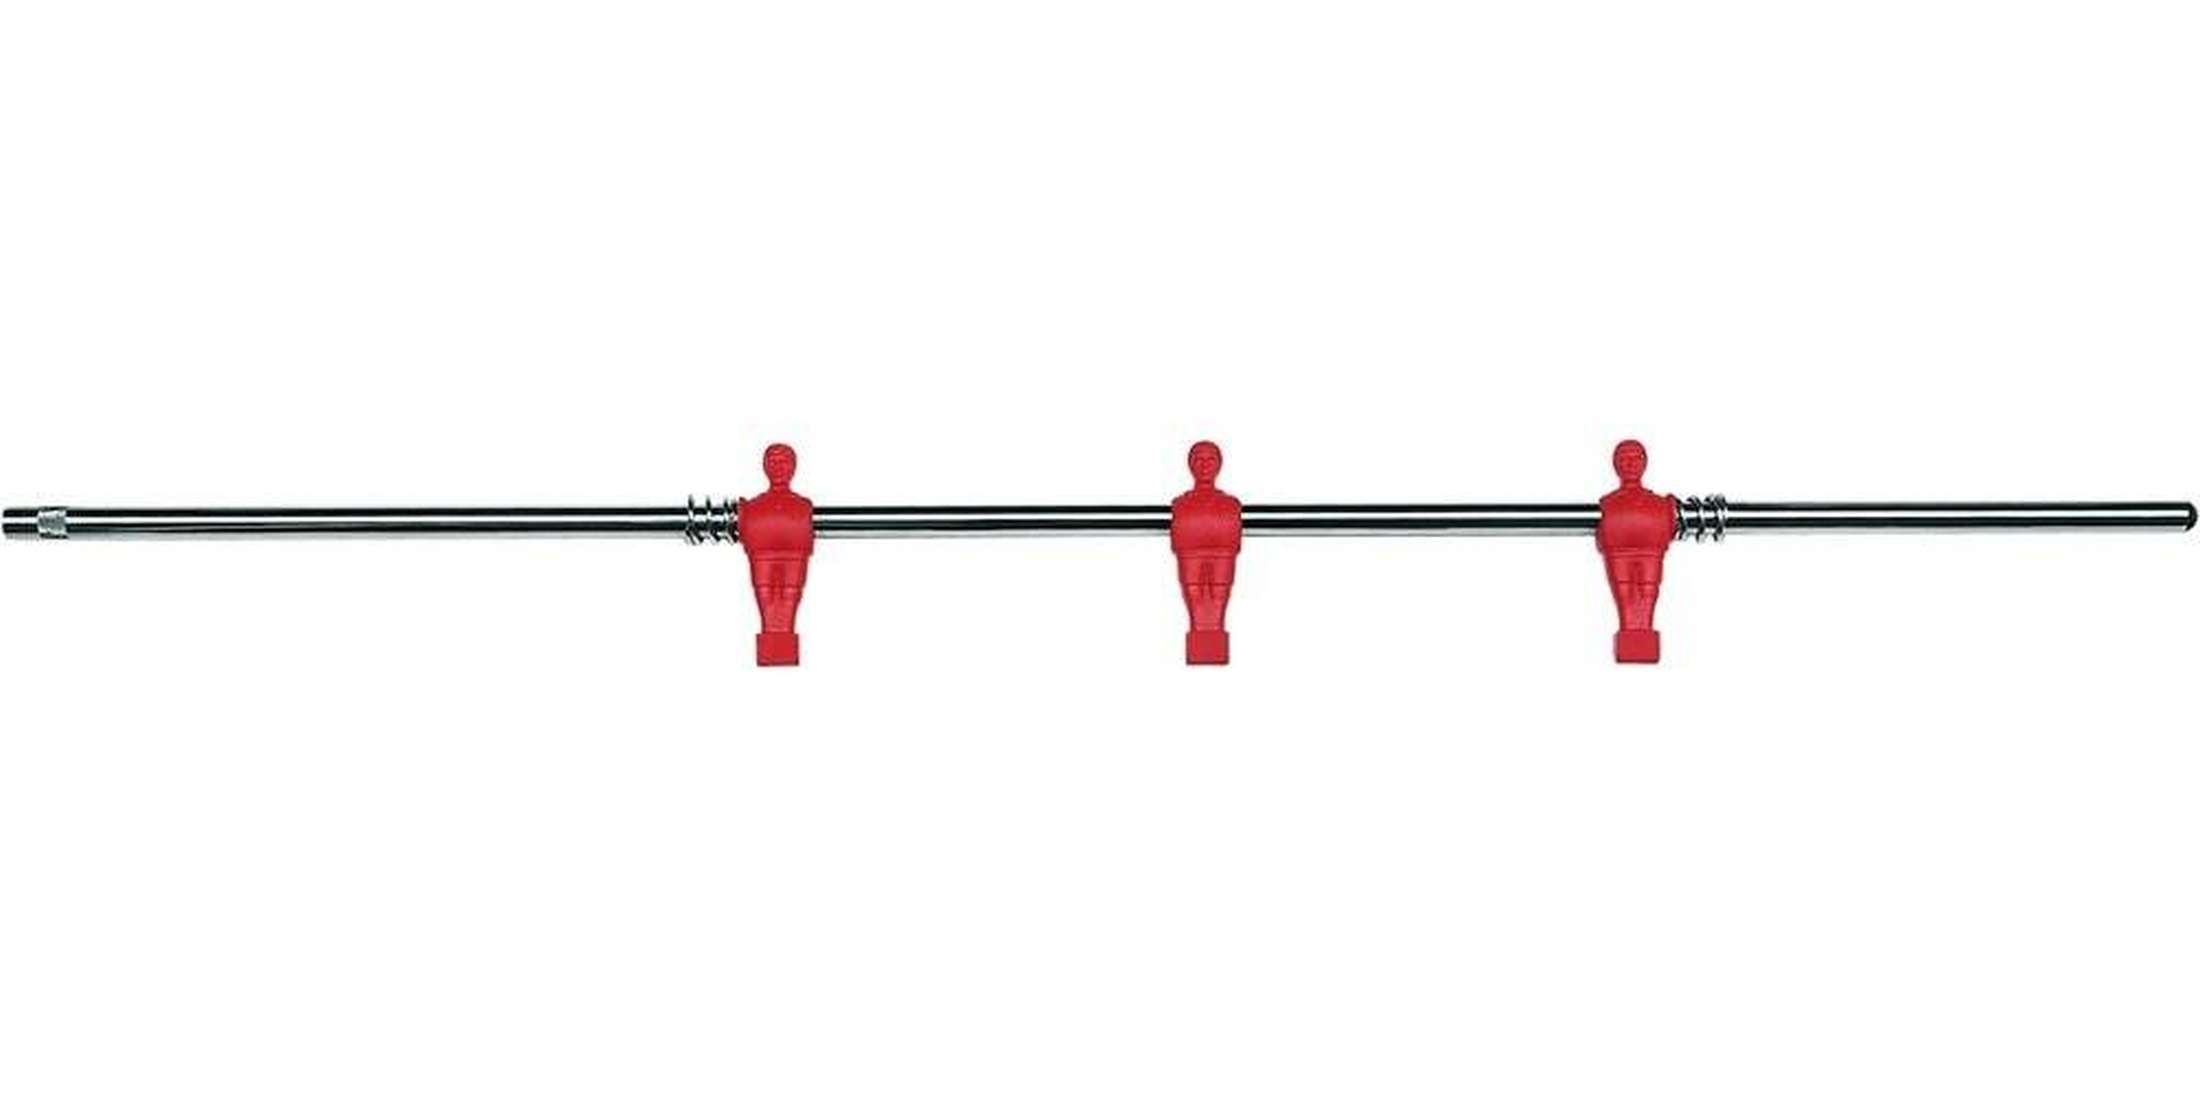 Foosball bar with welded players Red for 16 mm foosball tables-1